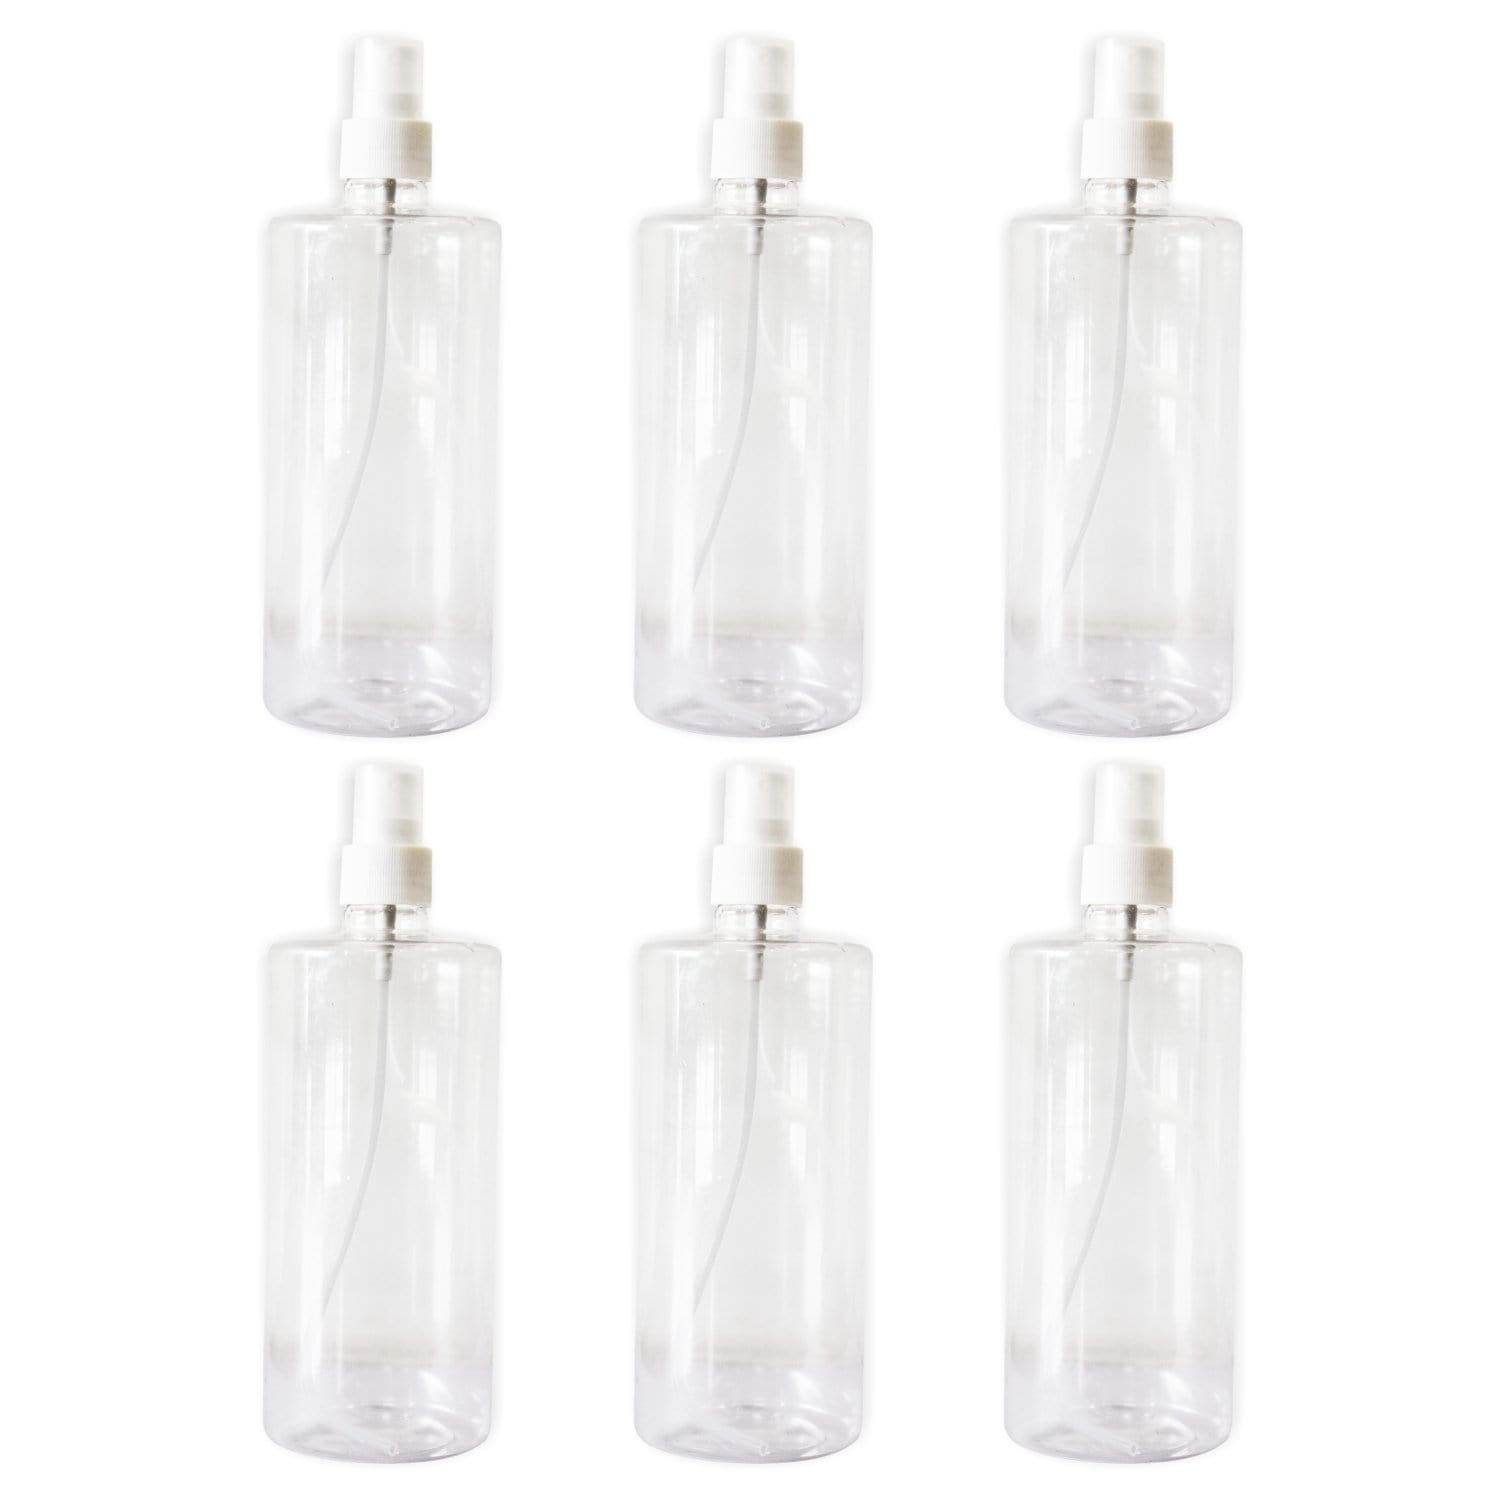 shoprythmindia Packaging,Plastic Travel Bottles Pack of 6 Transparent Mist Spray Bottle Best Used For Sanitizer Refillable Reusable Cosmetic Containers For Lotion Shampoo Massage Oils Outdoor Camping Travel